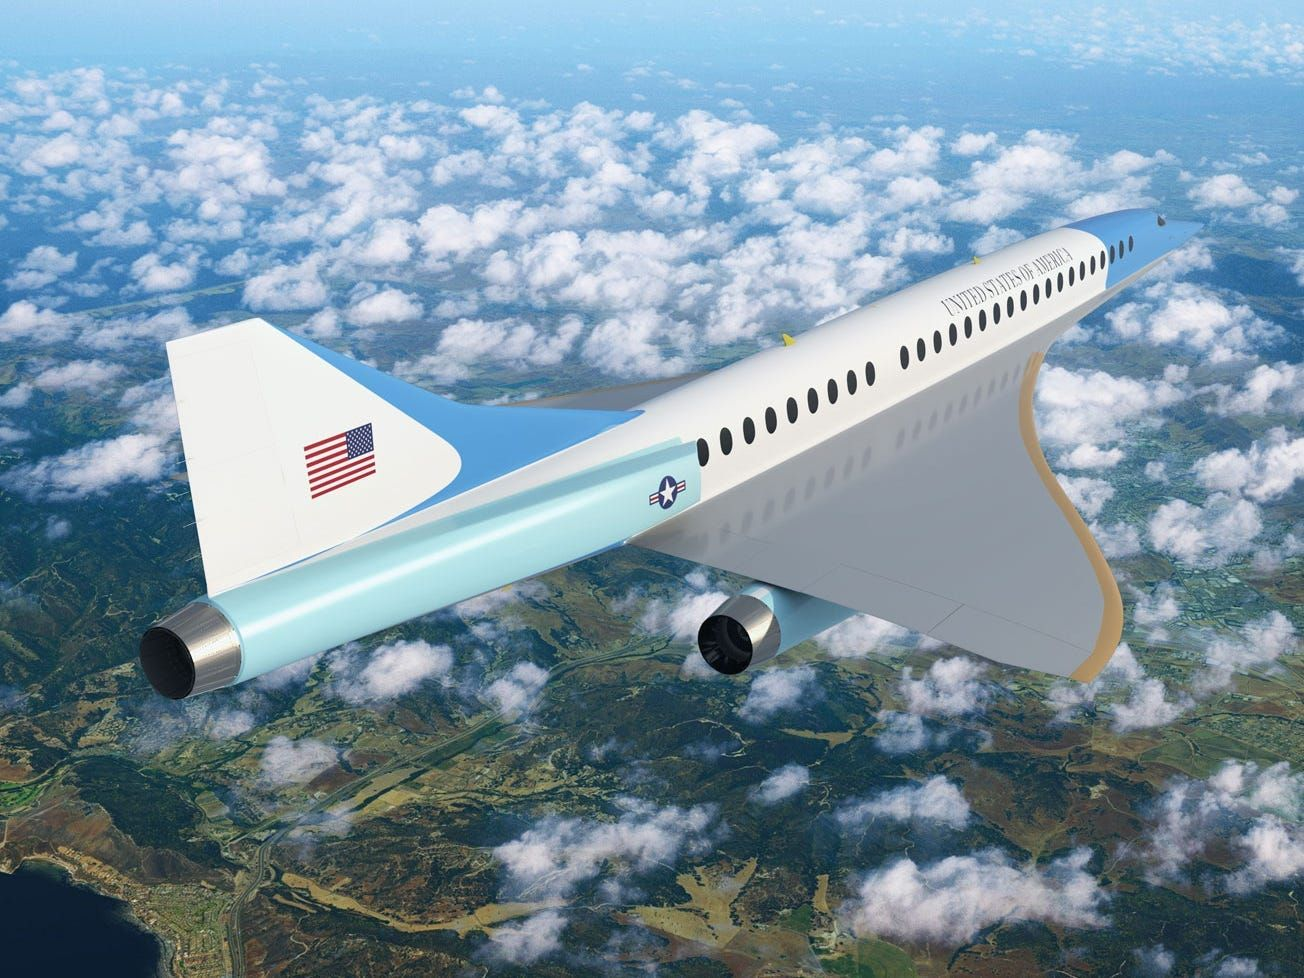 The Boom Overture jet is vying to become the first supersonic Air Force One — here's an early look